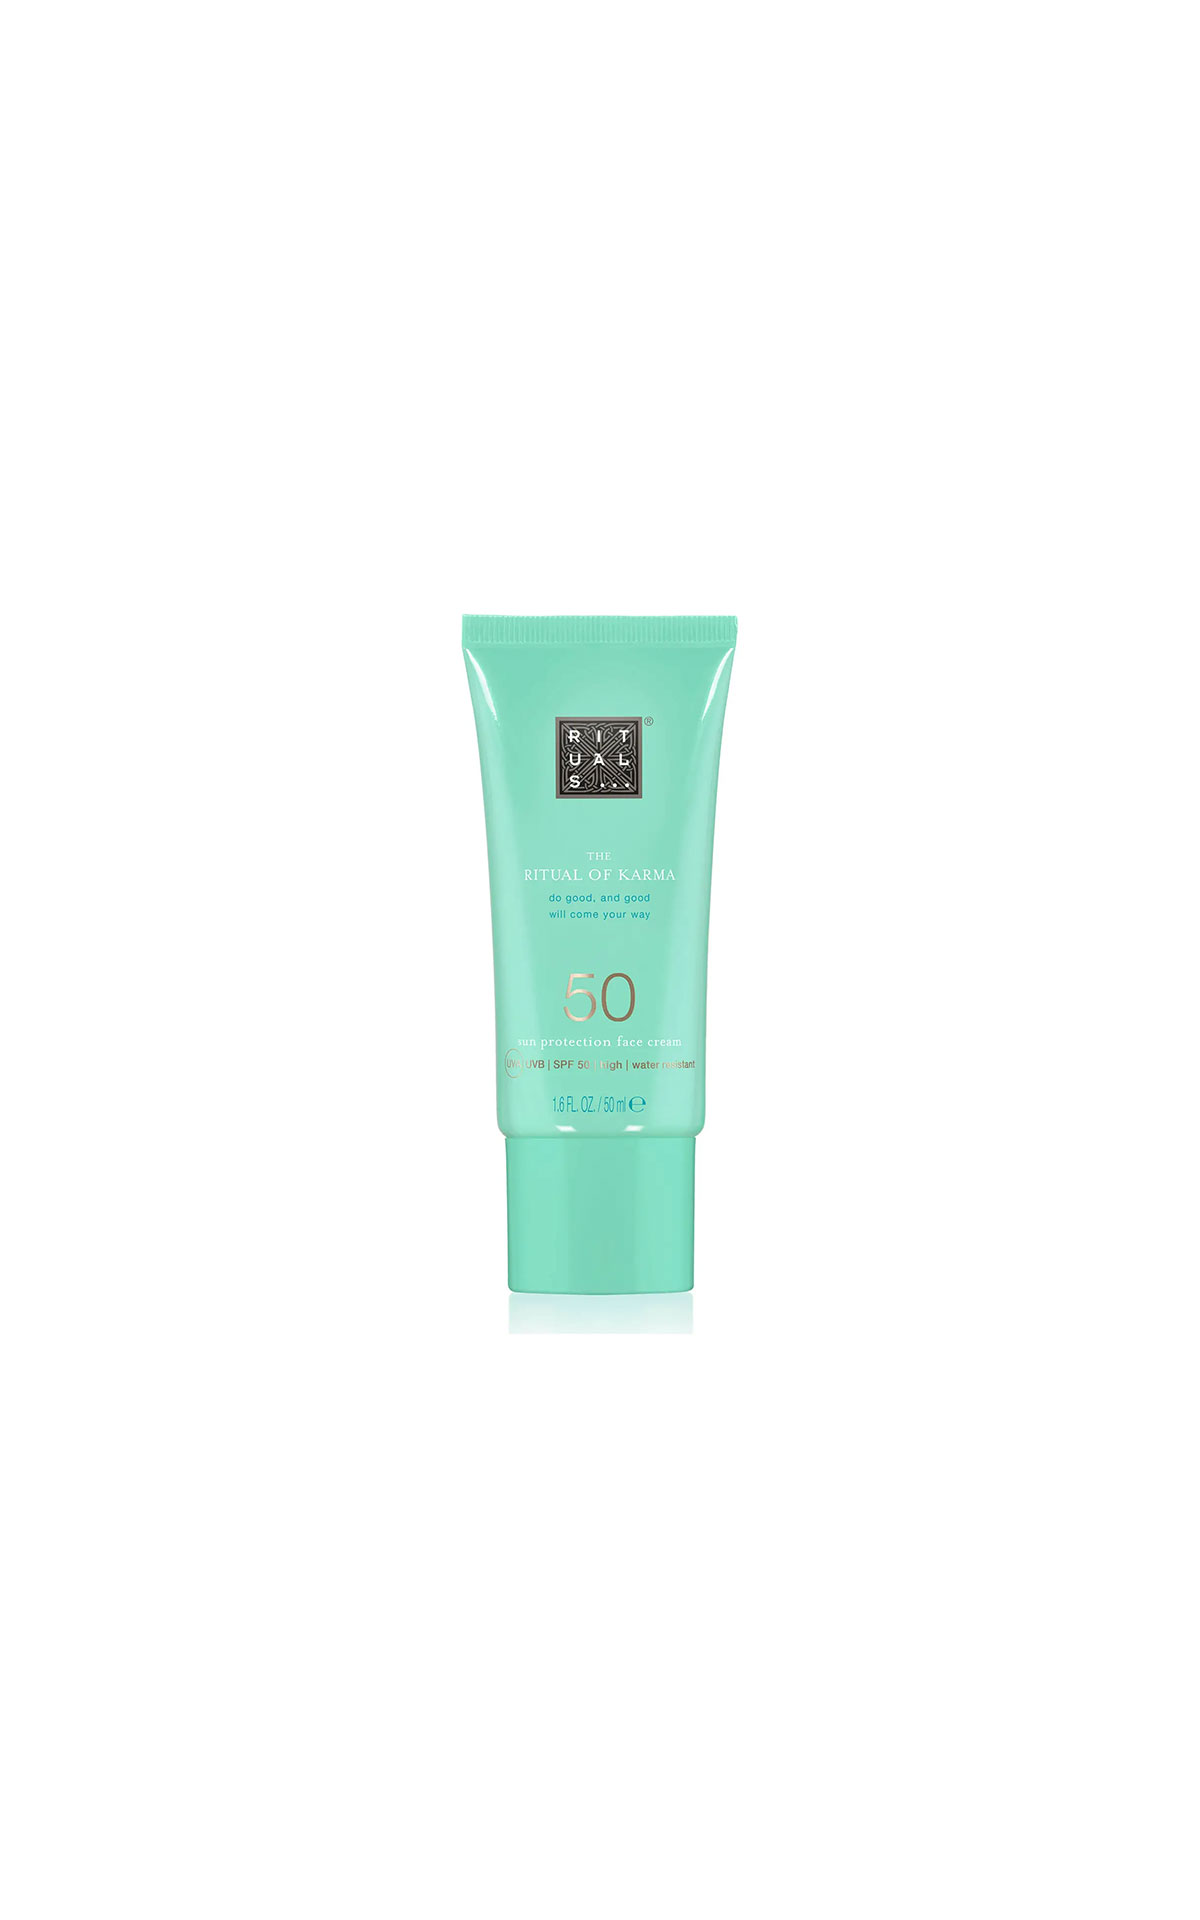 Rituals Karma sun protection face cream 50 from Bicester Village